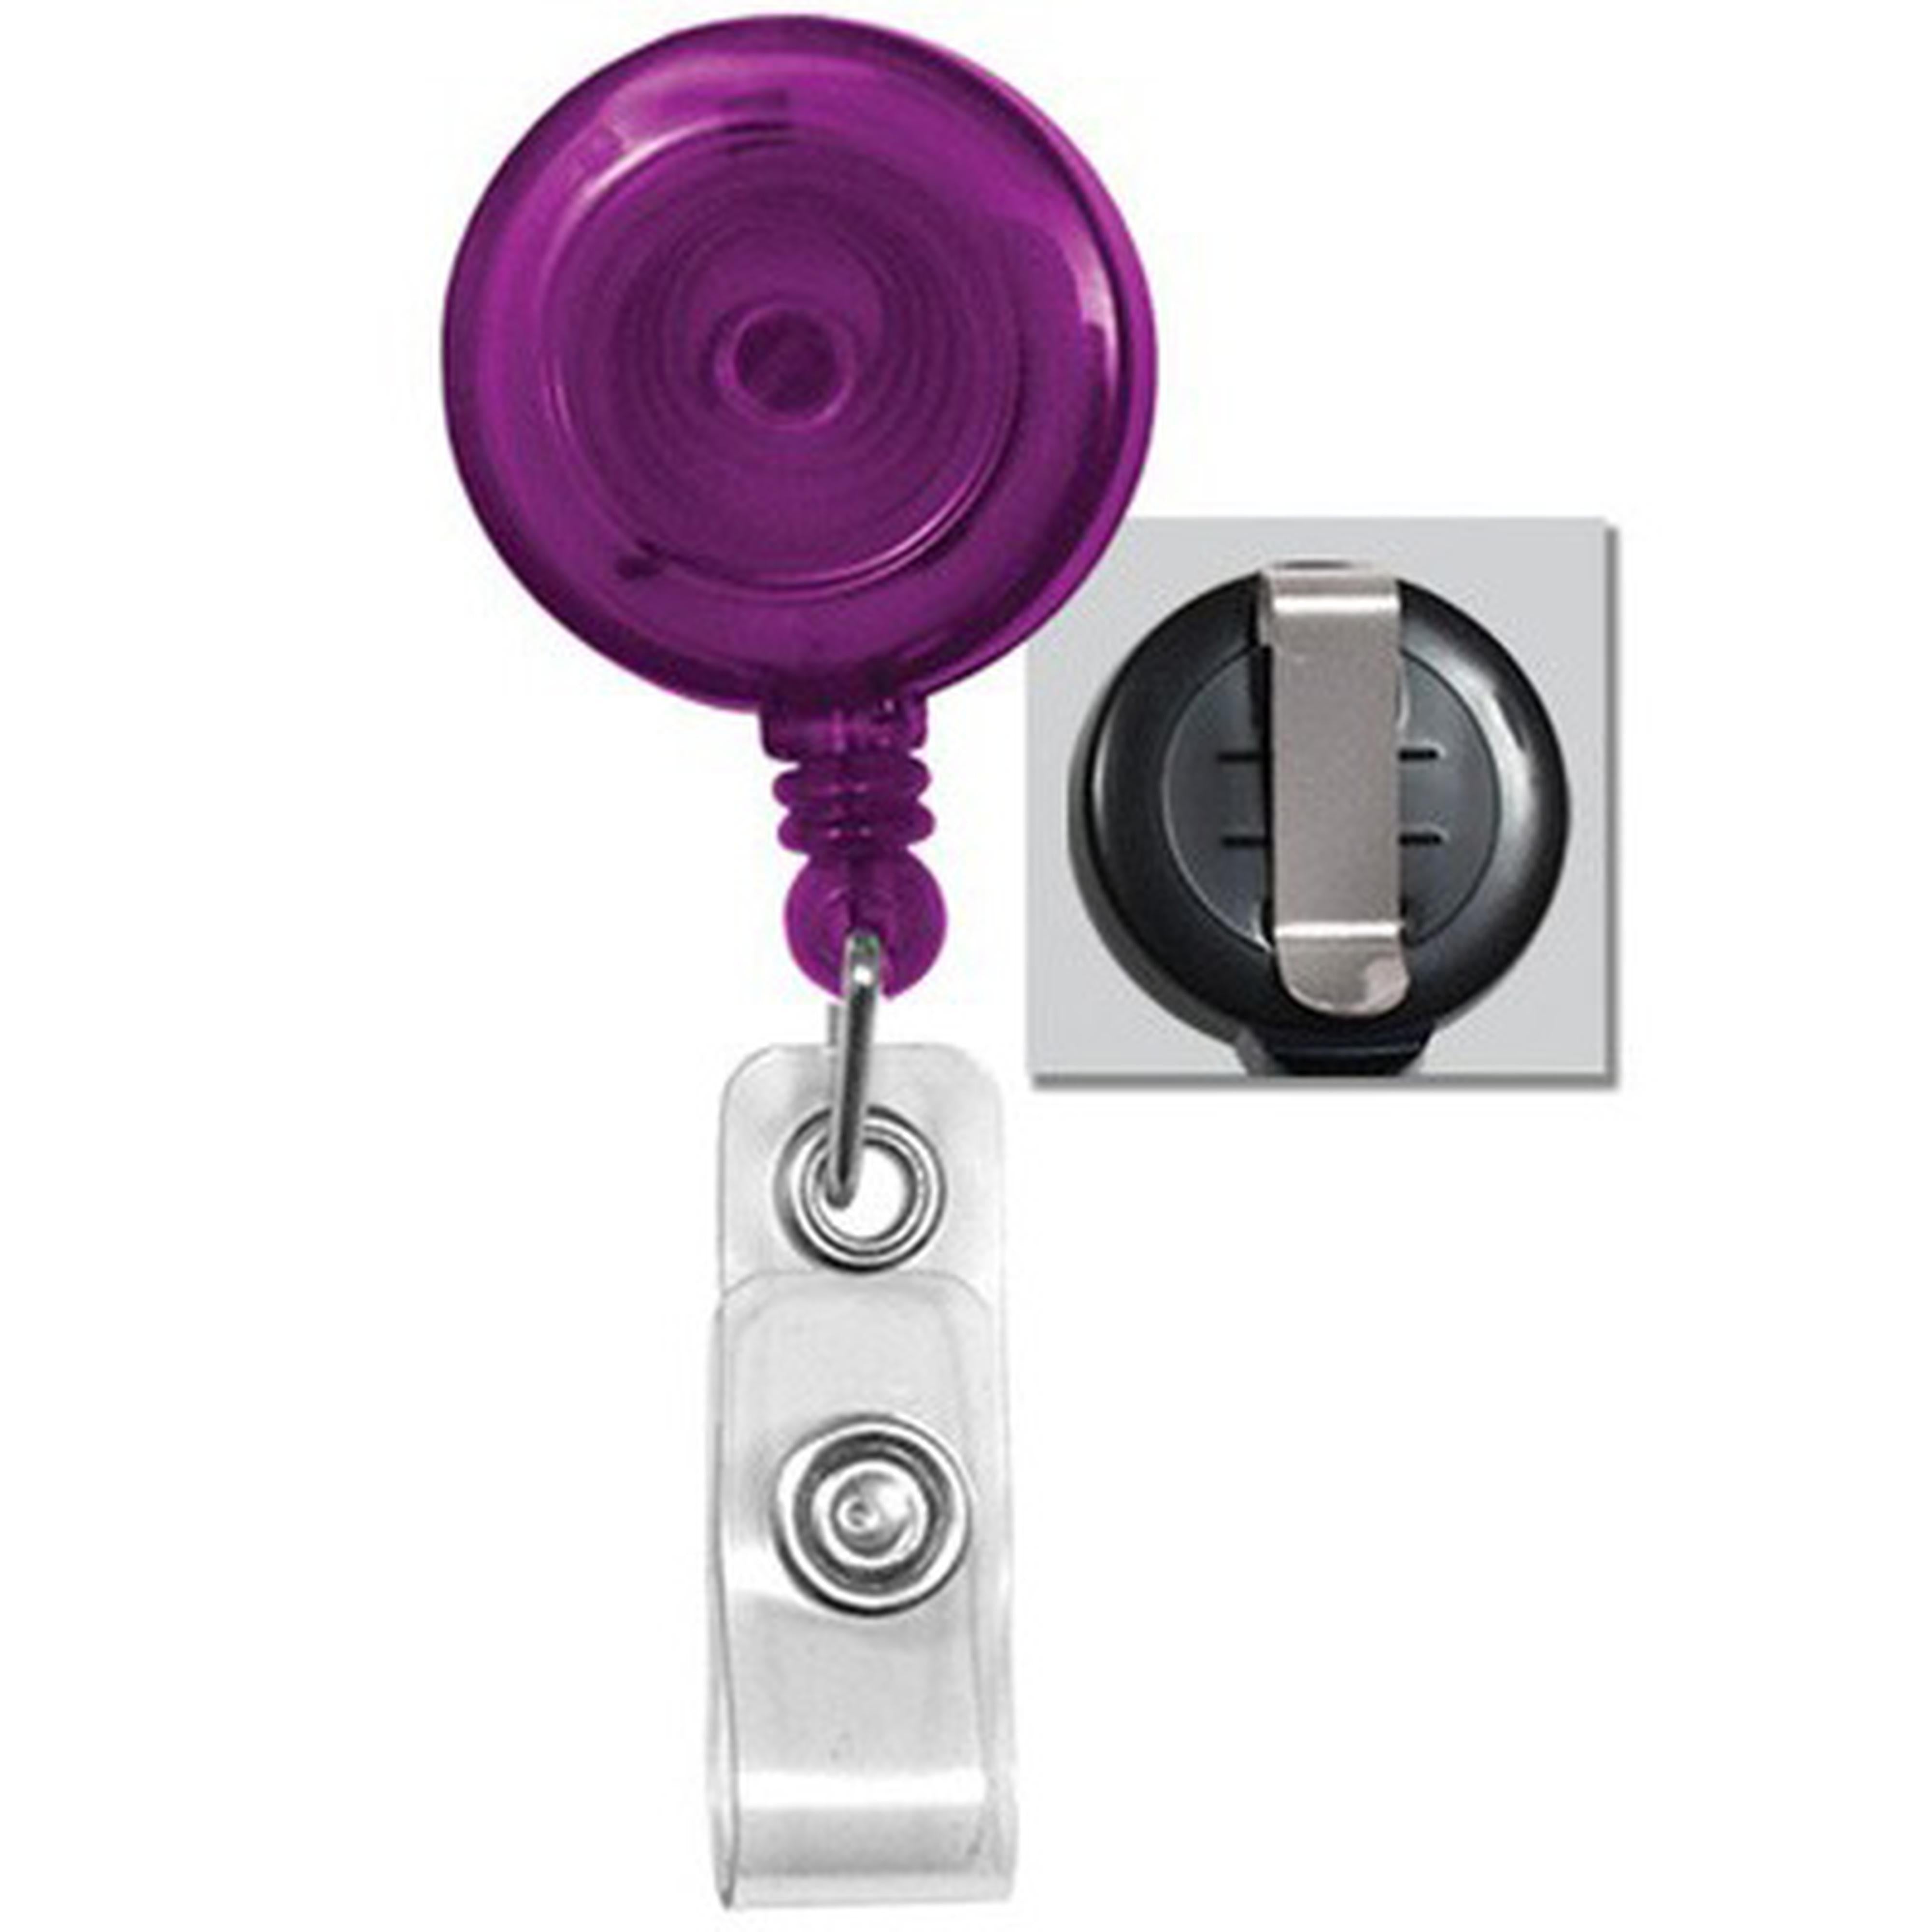 Clip-On Retractable Badge Holder with Slide Clip - Translucent